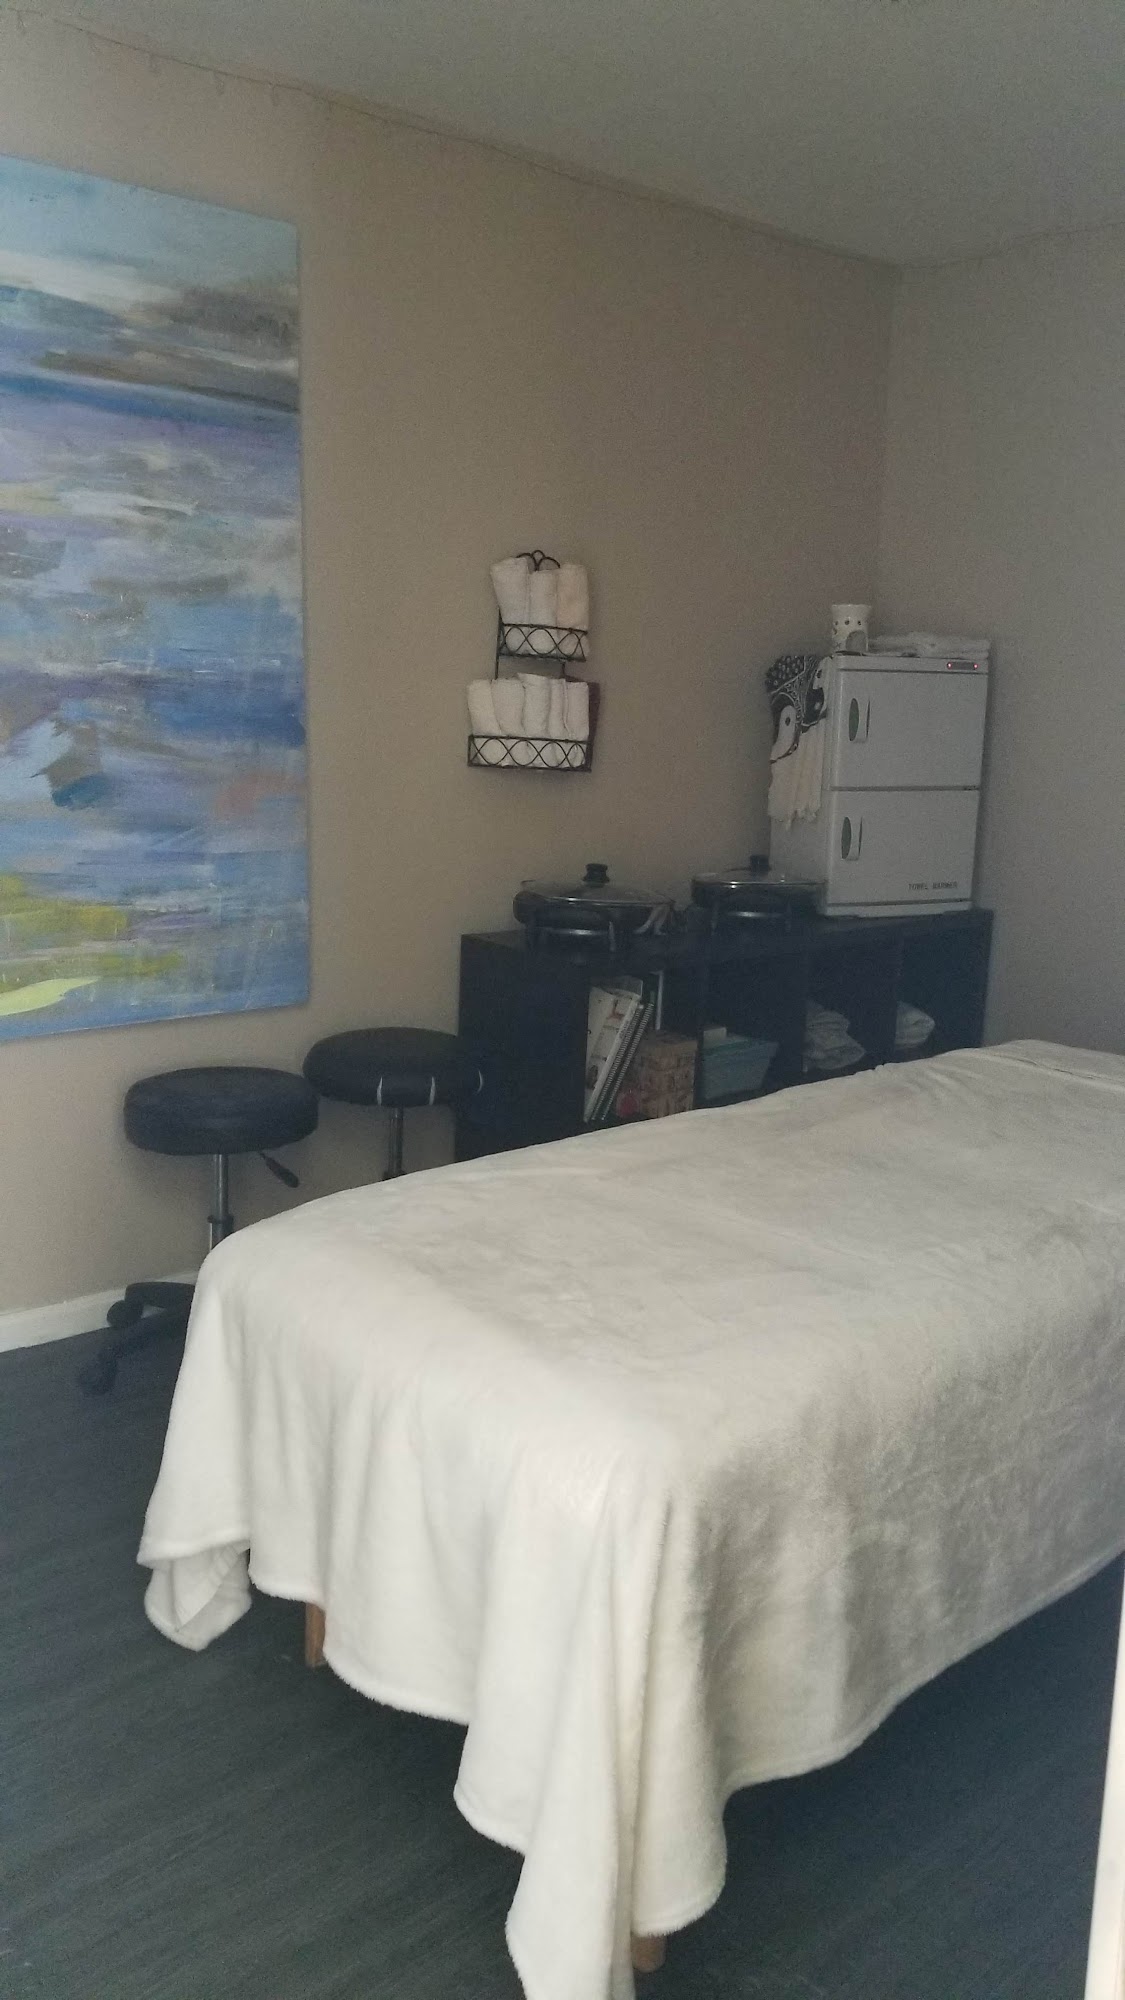 The Massage Place and Wellness Center